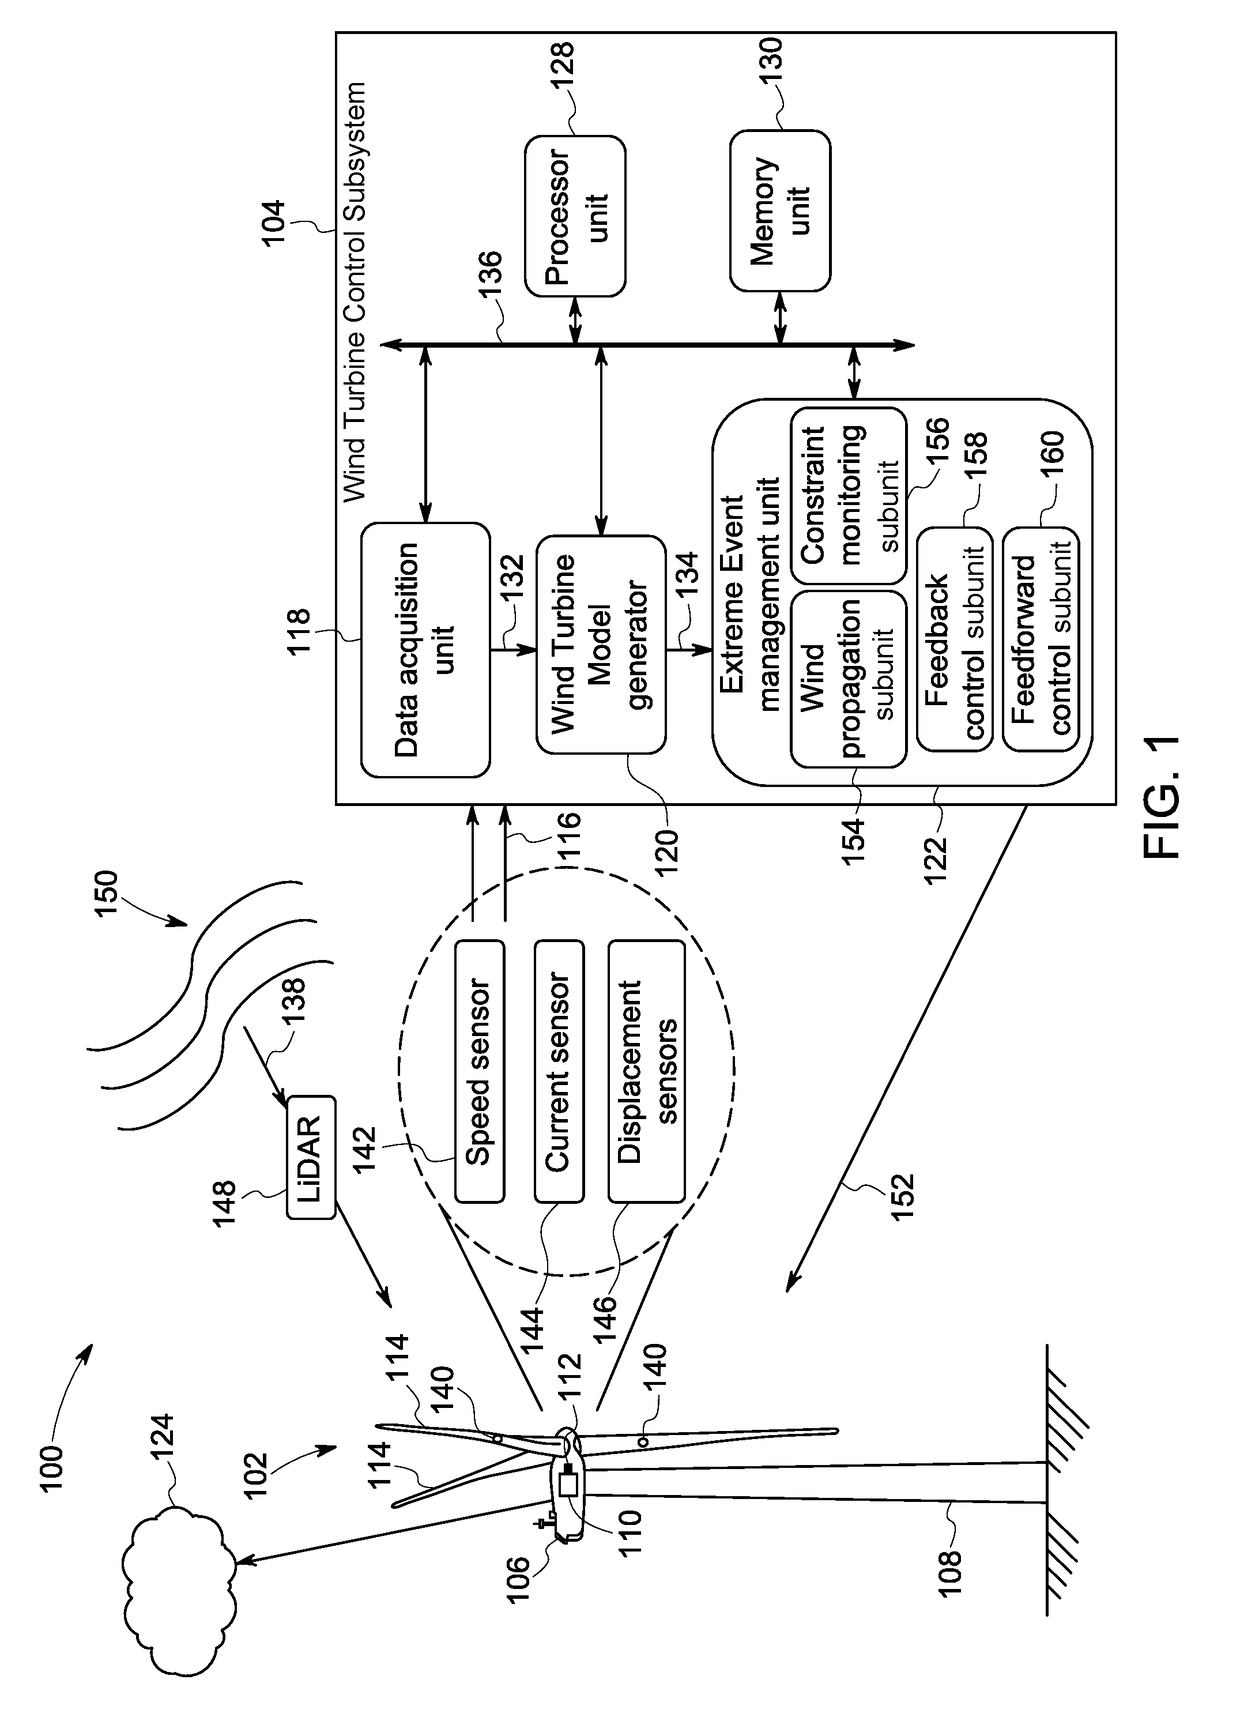 Methods and systems for feedforward control of wind turbines